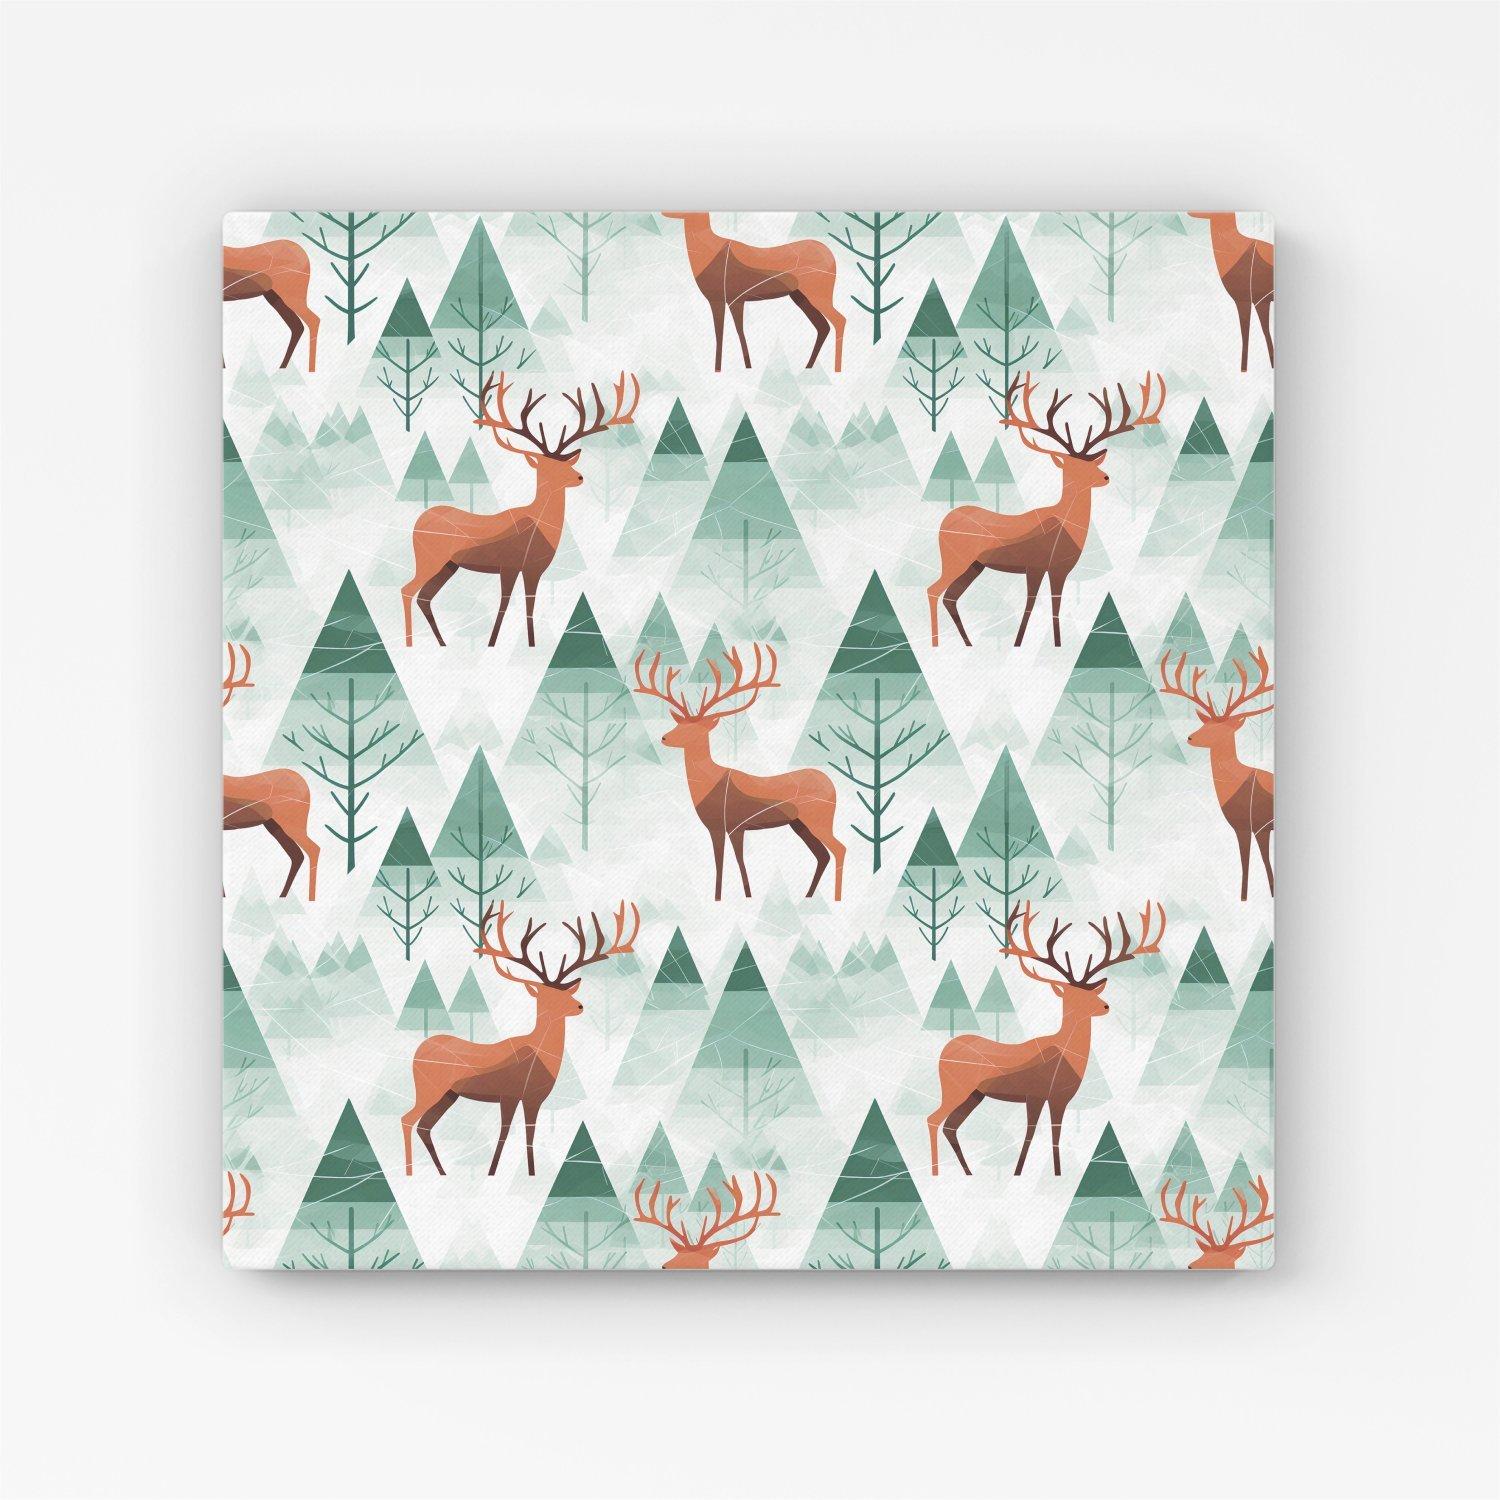 Reindeer On A Snowy Landscape Canvas